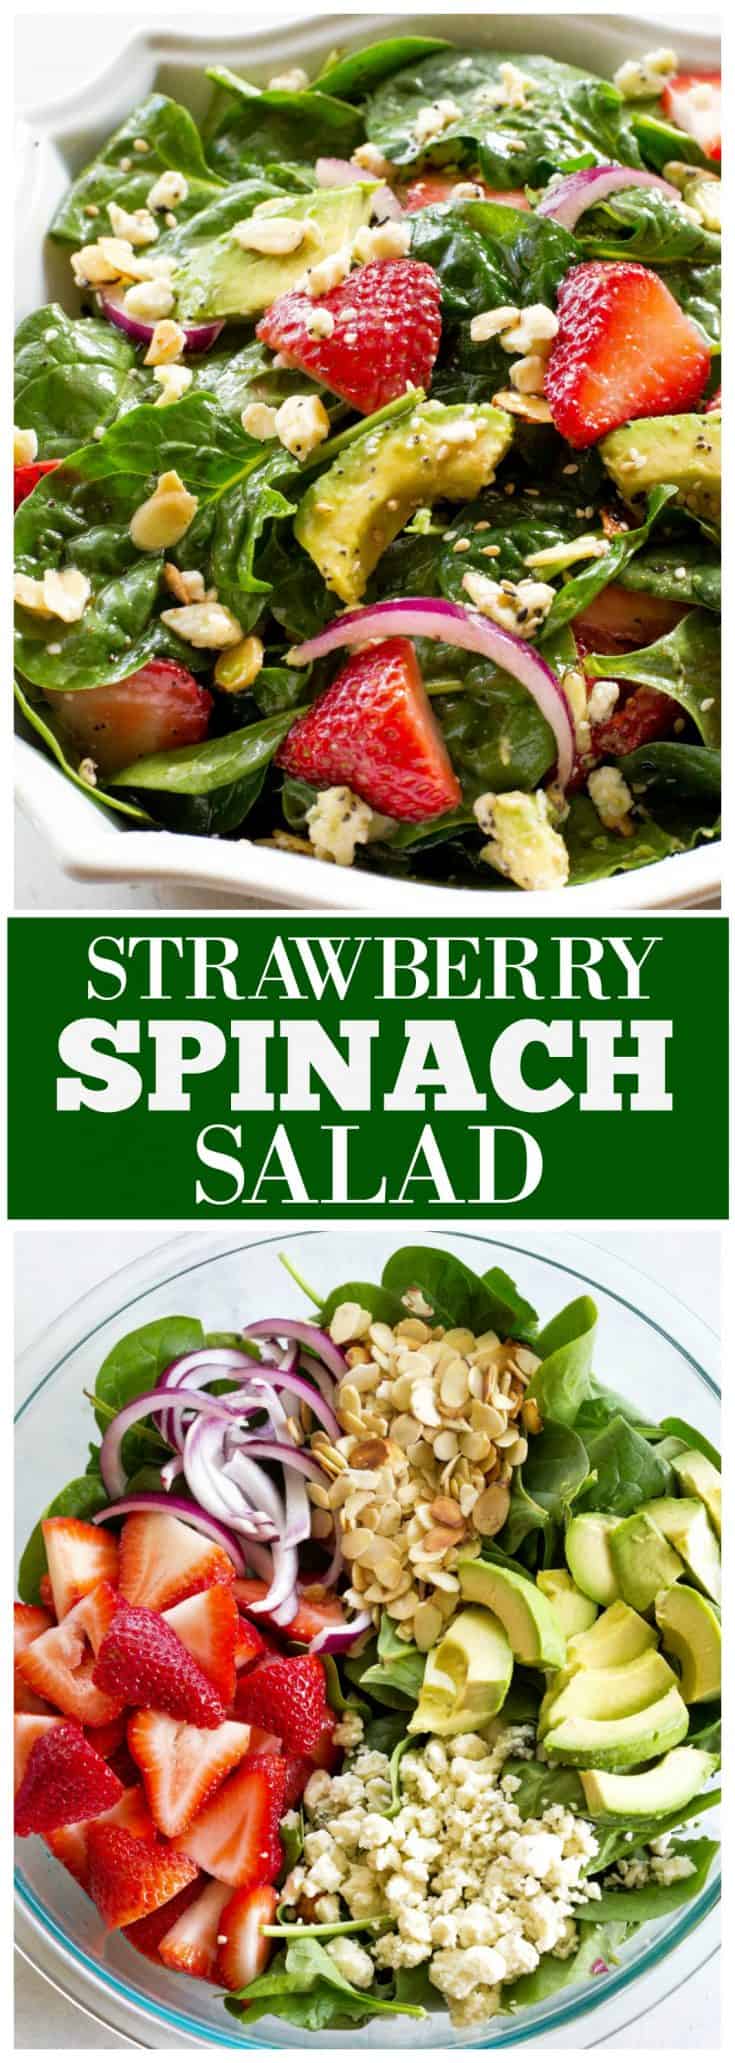 Strawberry Spinach Salad | The Girl Who Ate Everything